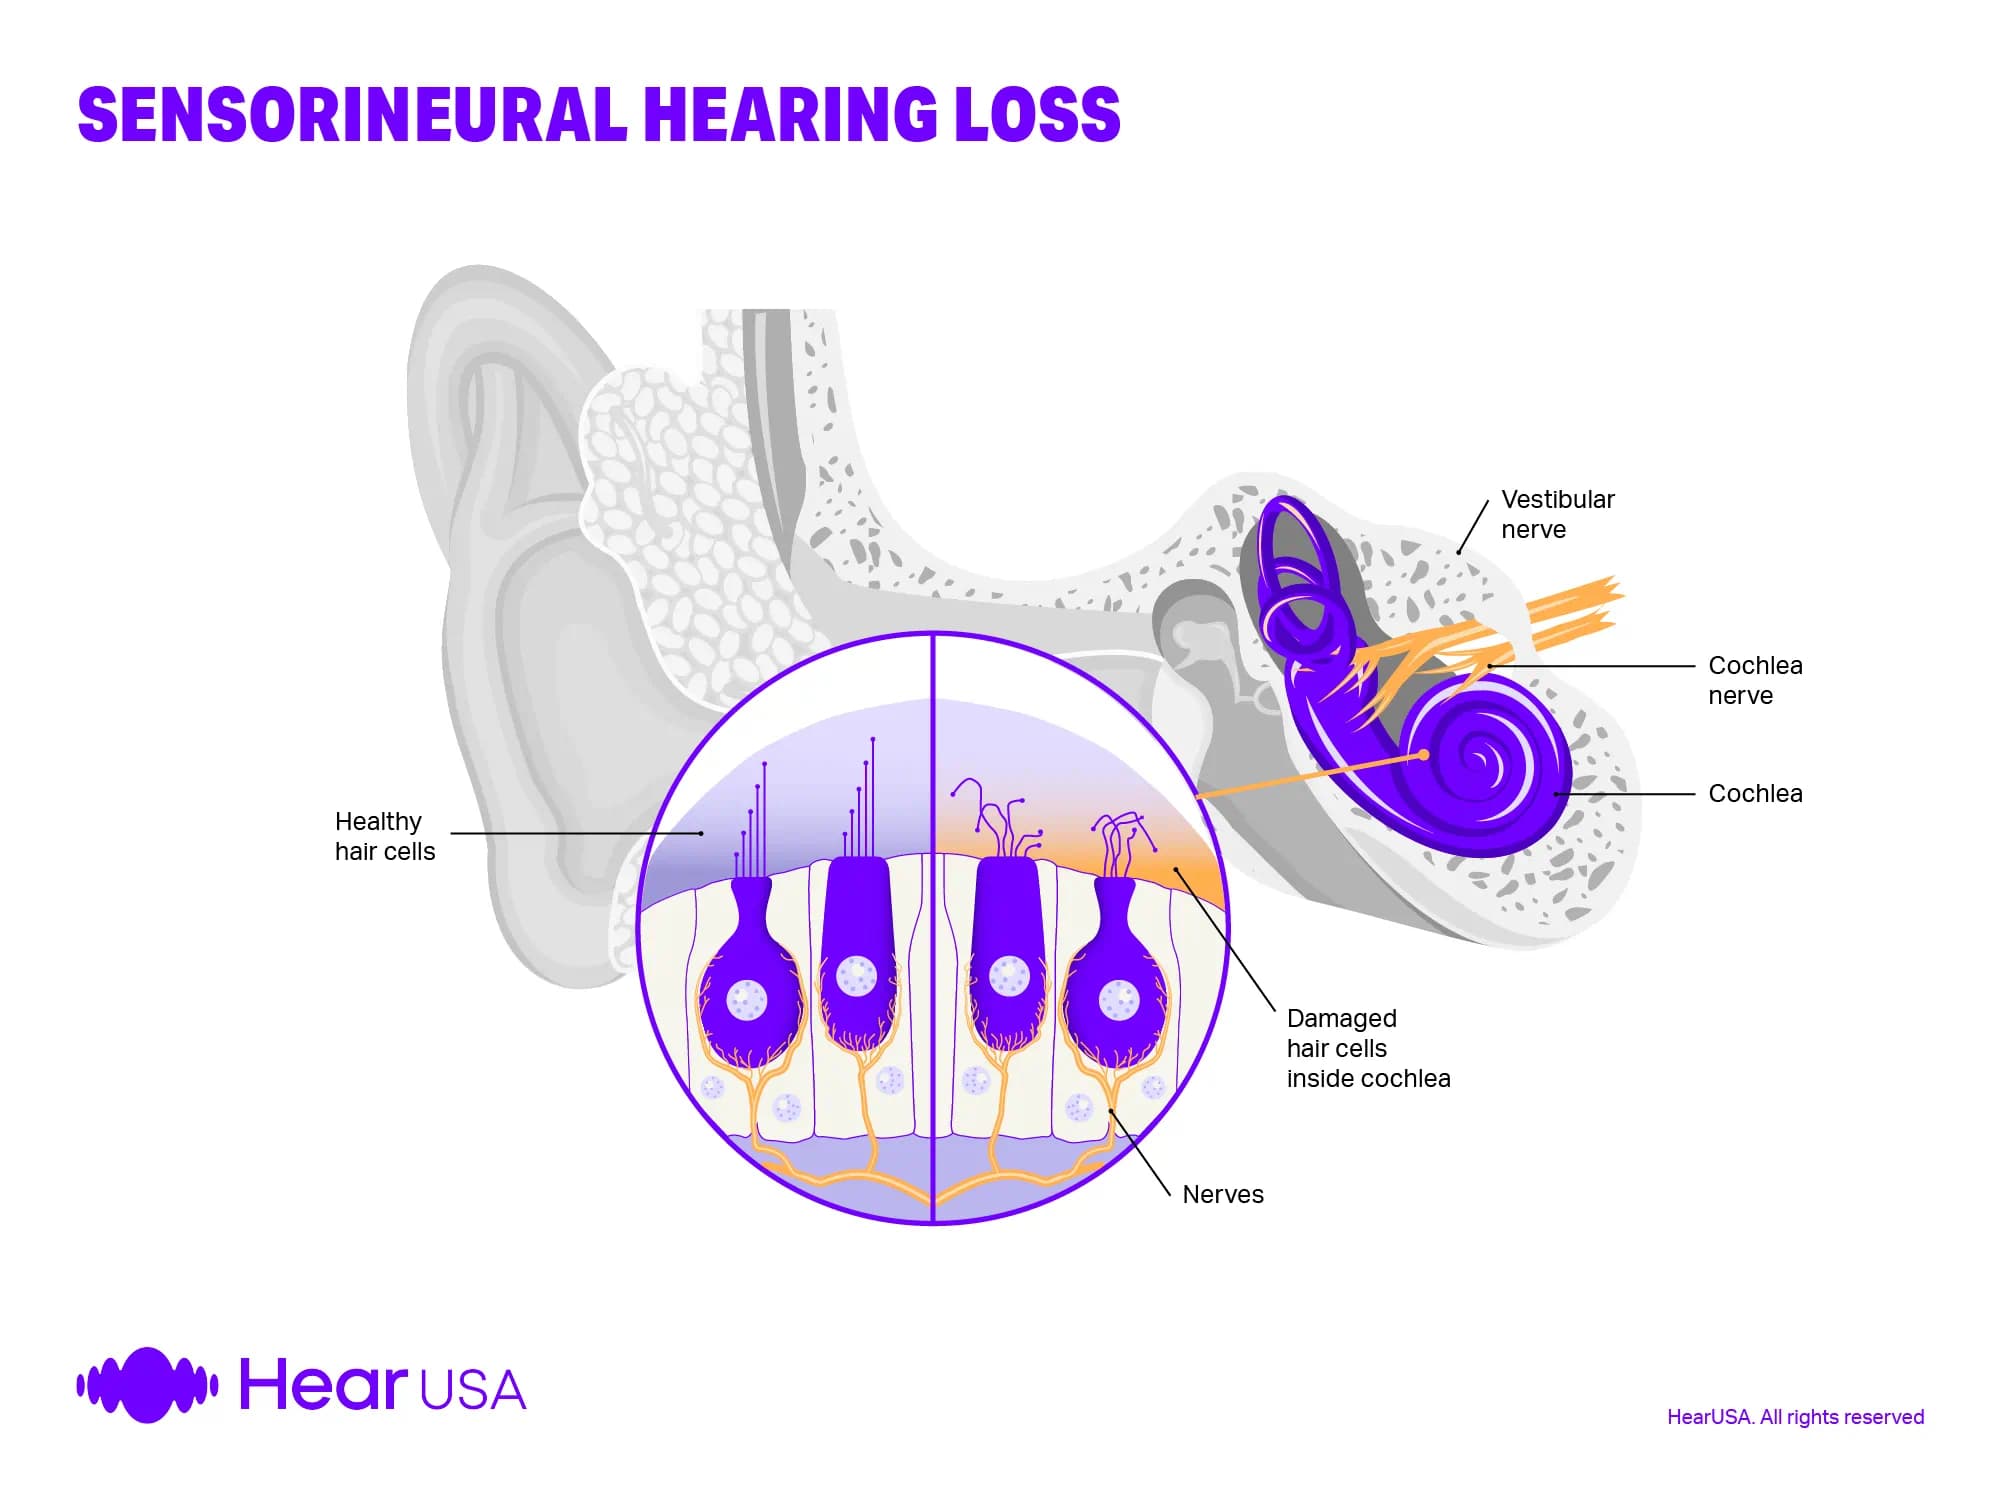 Sensorineural hearing loss is caused by inner ear problems but can be helped by wearing hearing aids